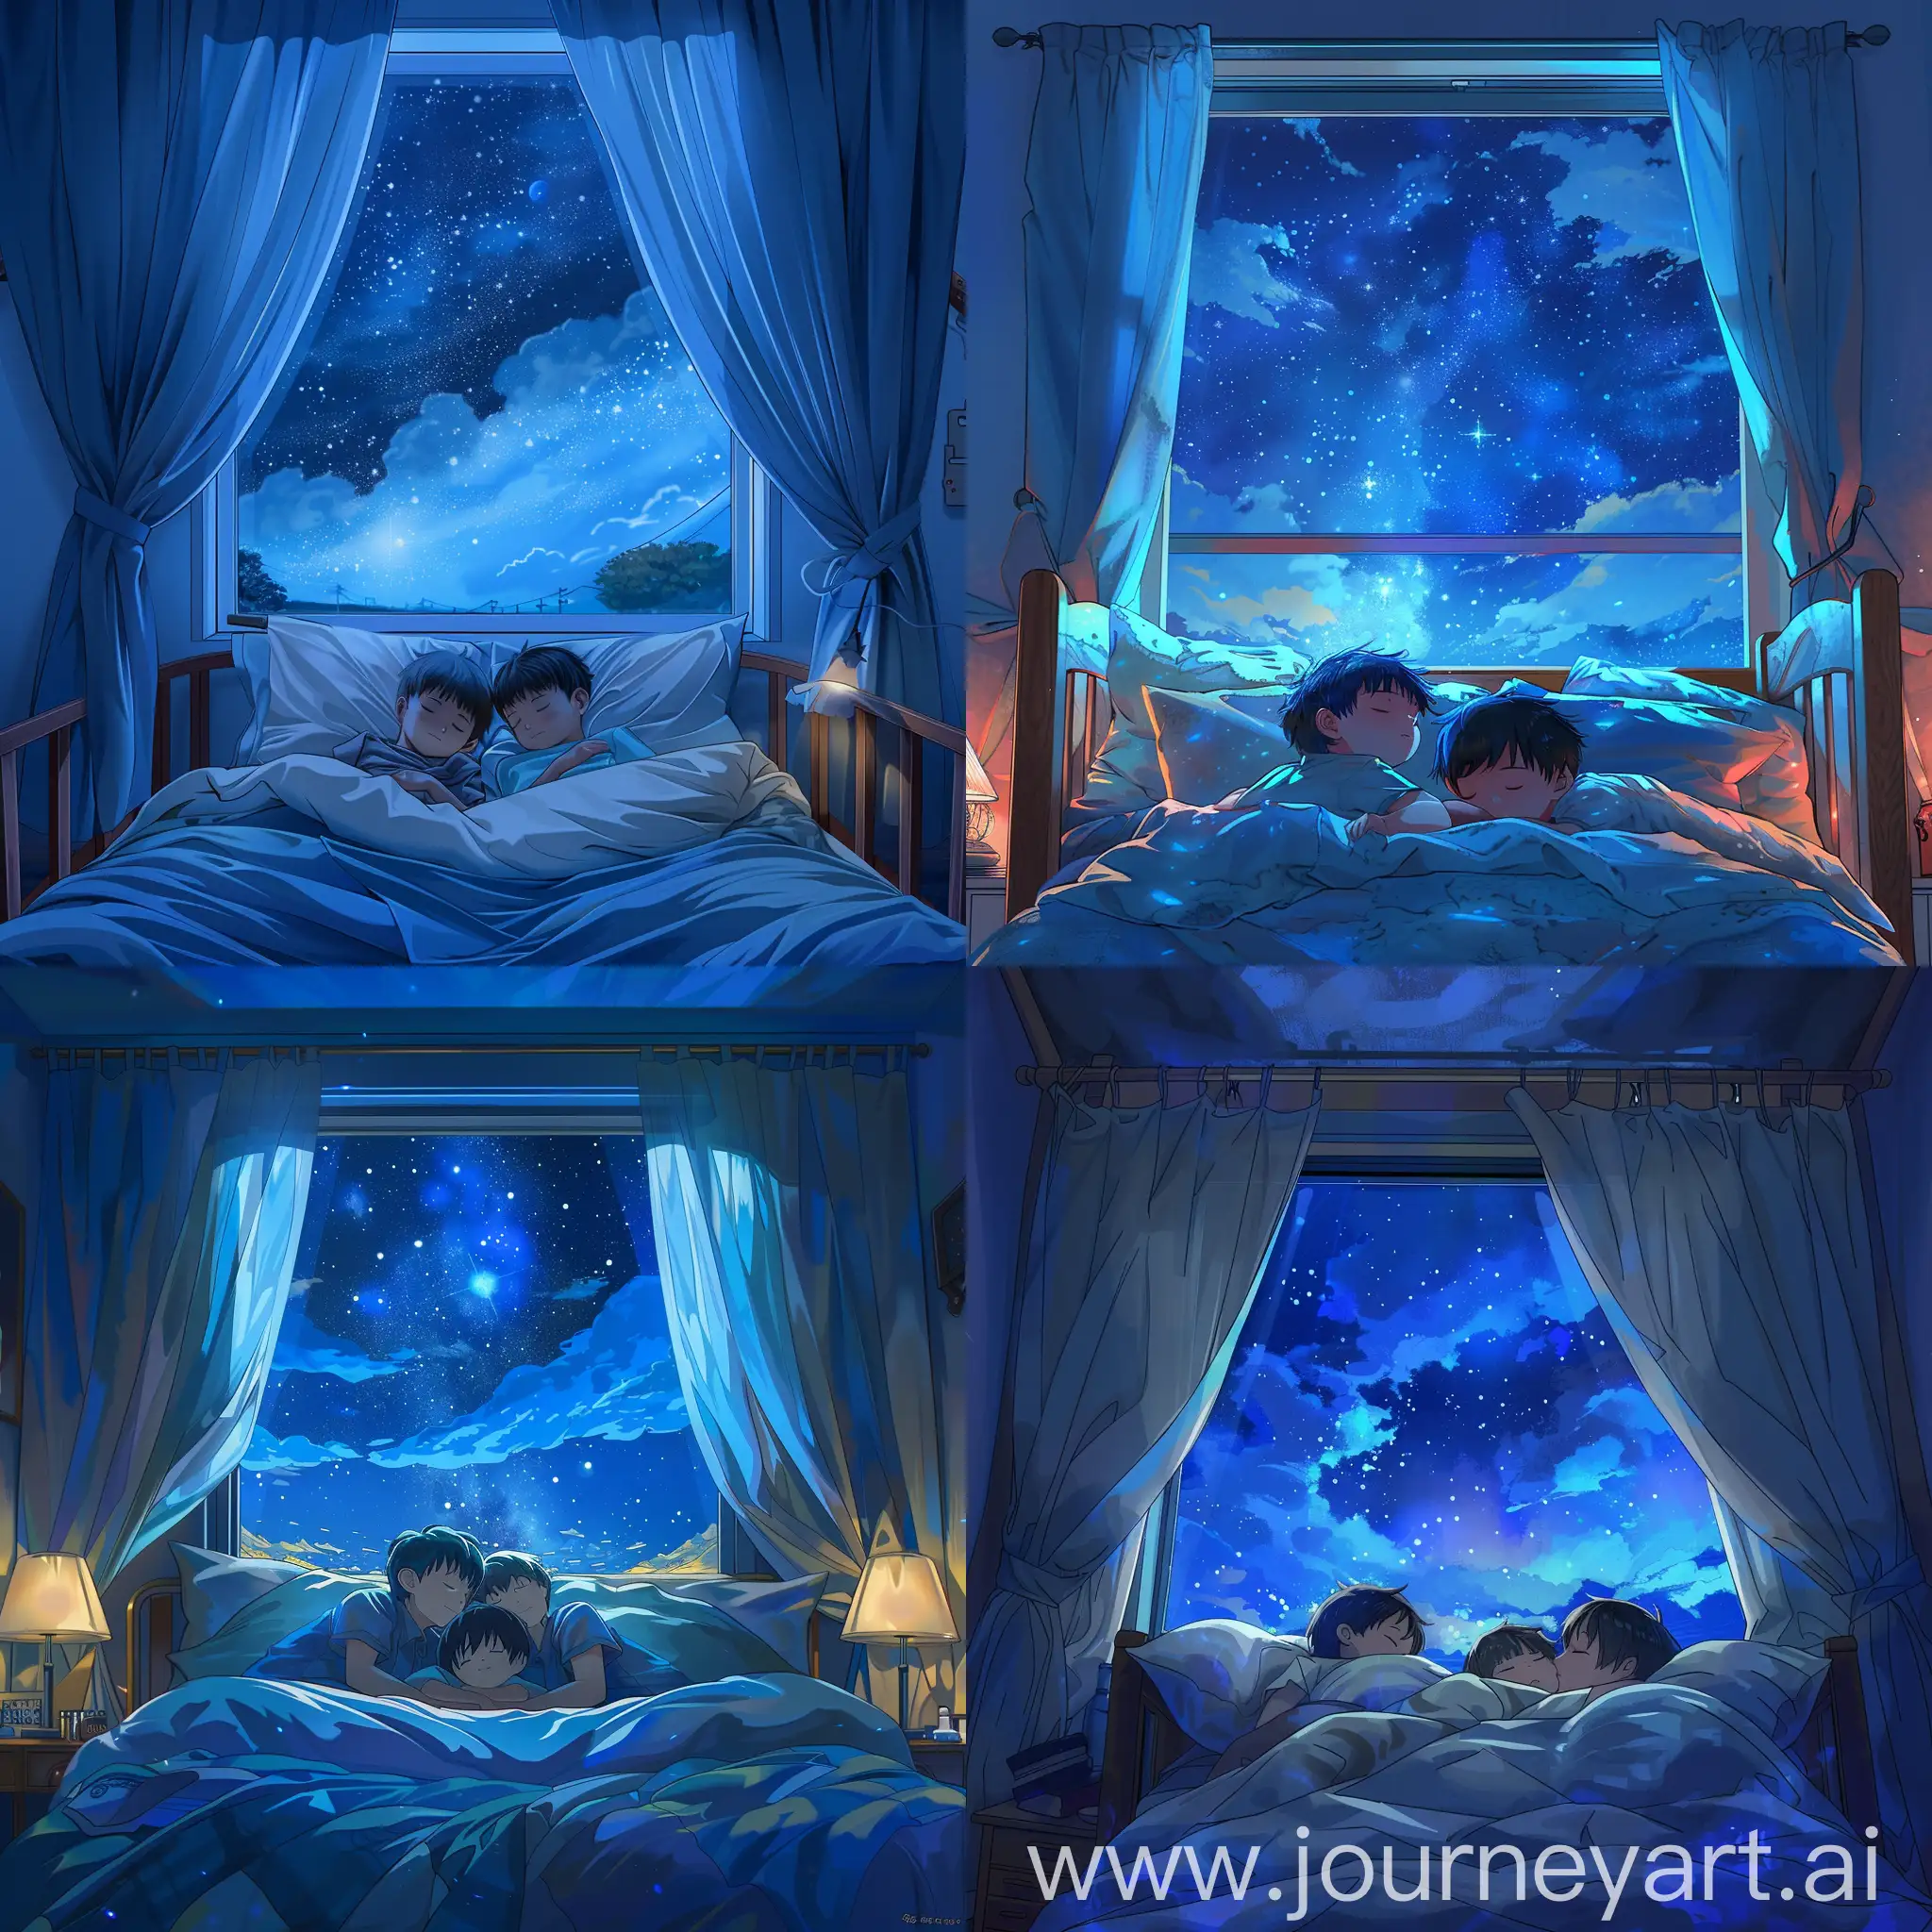 Anime style,aesthetic mixing with makoto shinkai style,highly touches of anime style,two boy kids sleeping between his mom and dad on a cozy bed,❤family,cozy bed,blue night has kissed the surroundings and room,beautiful nebula night view from the window,avoid bad view and avoid distorted view or there faces,simple room,curtains.